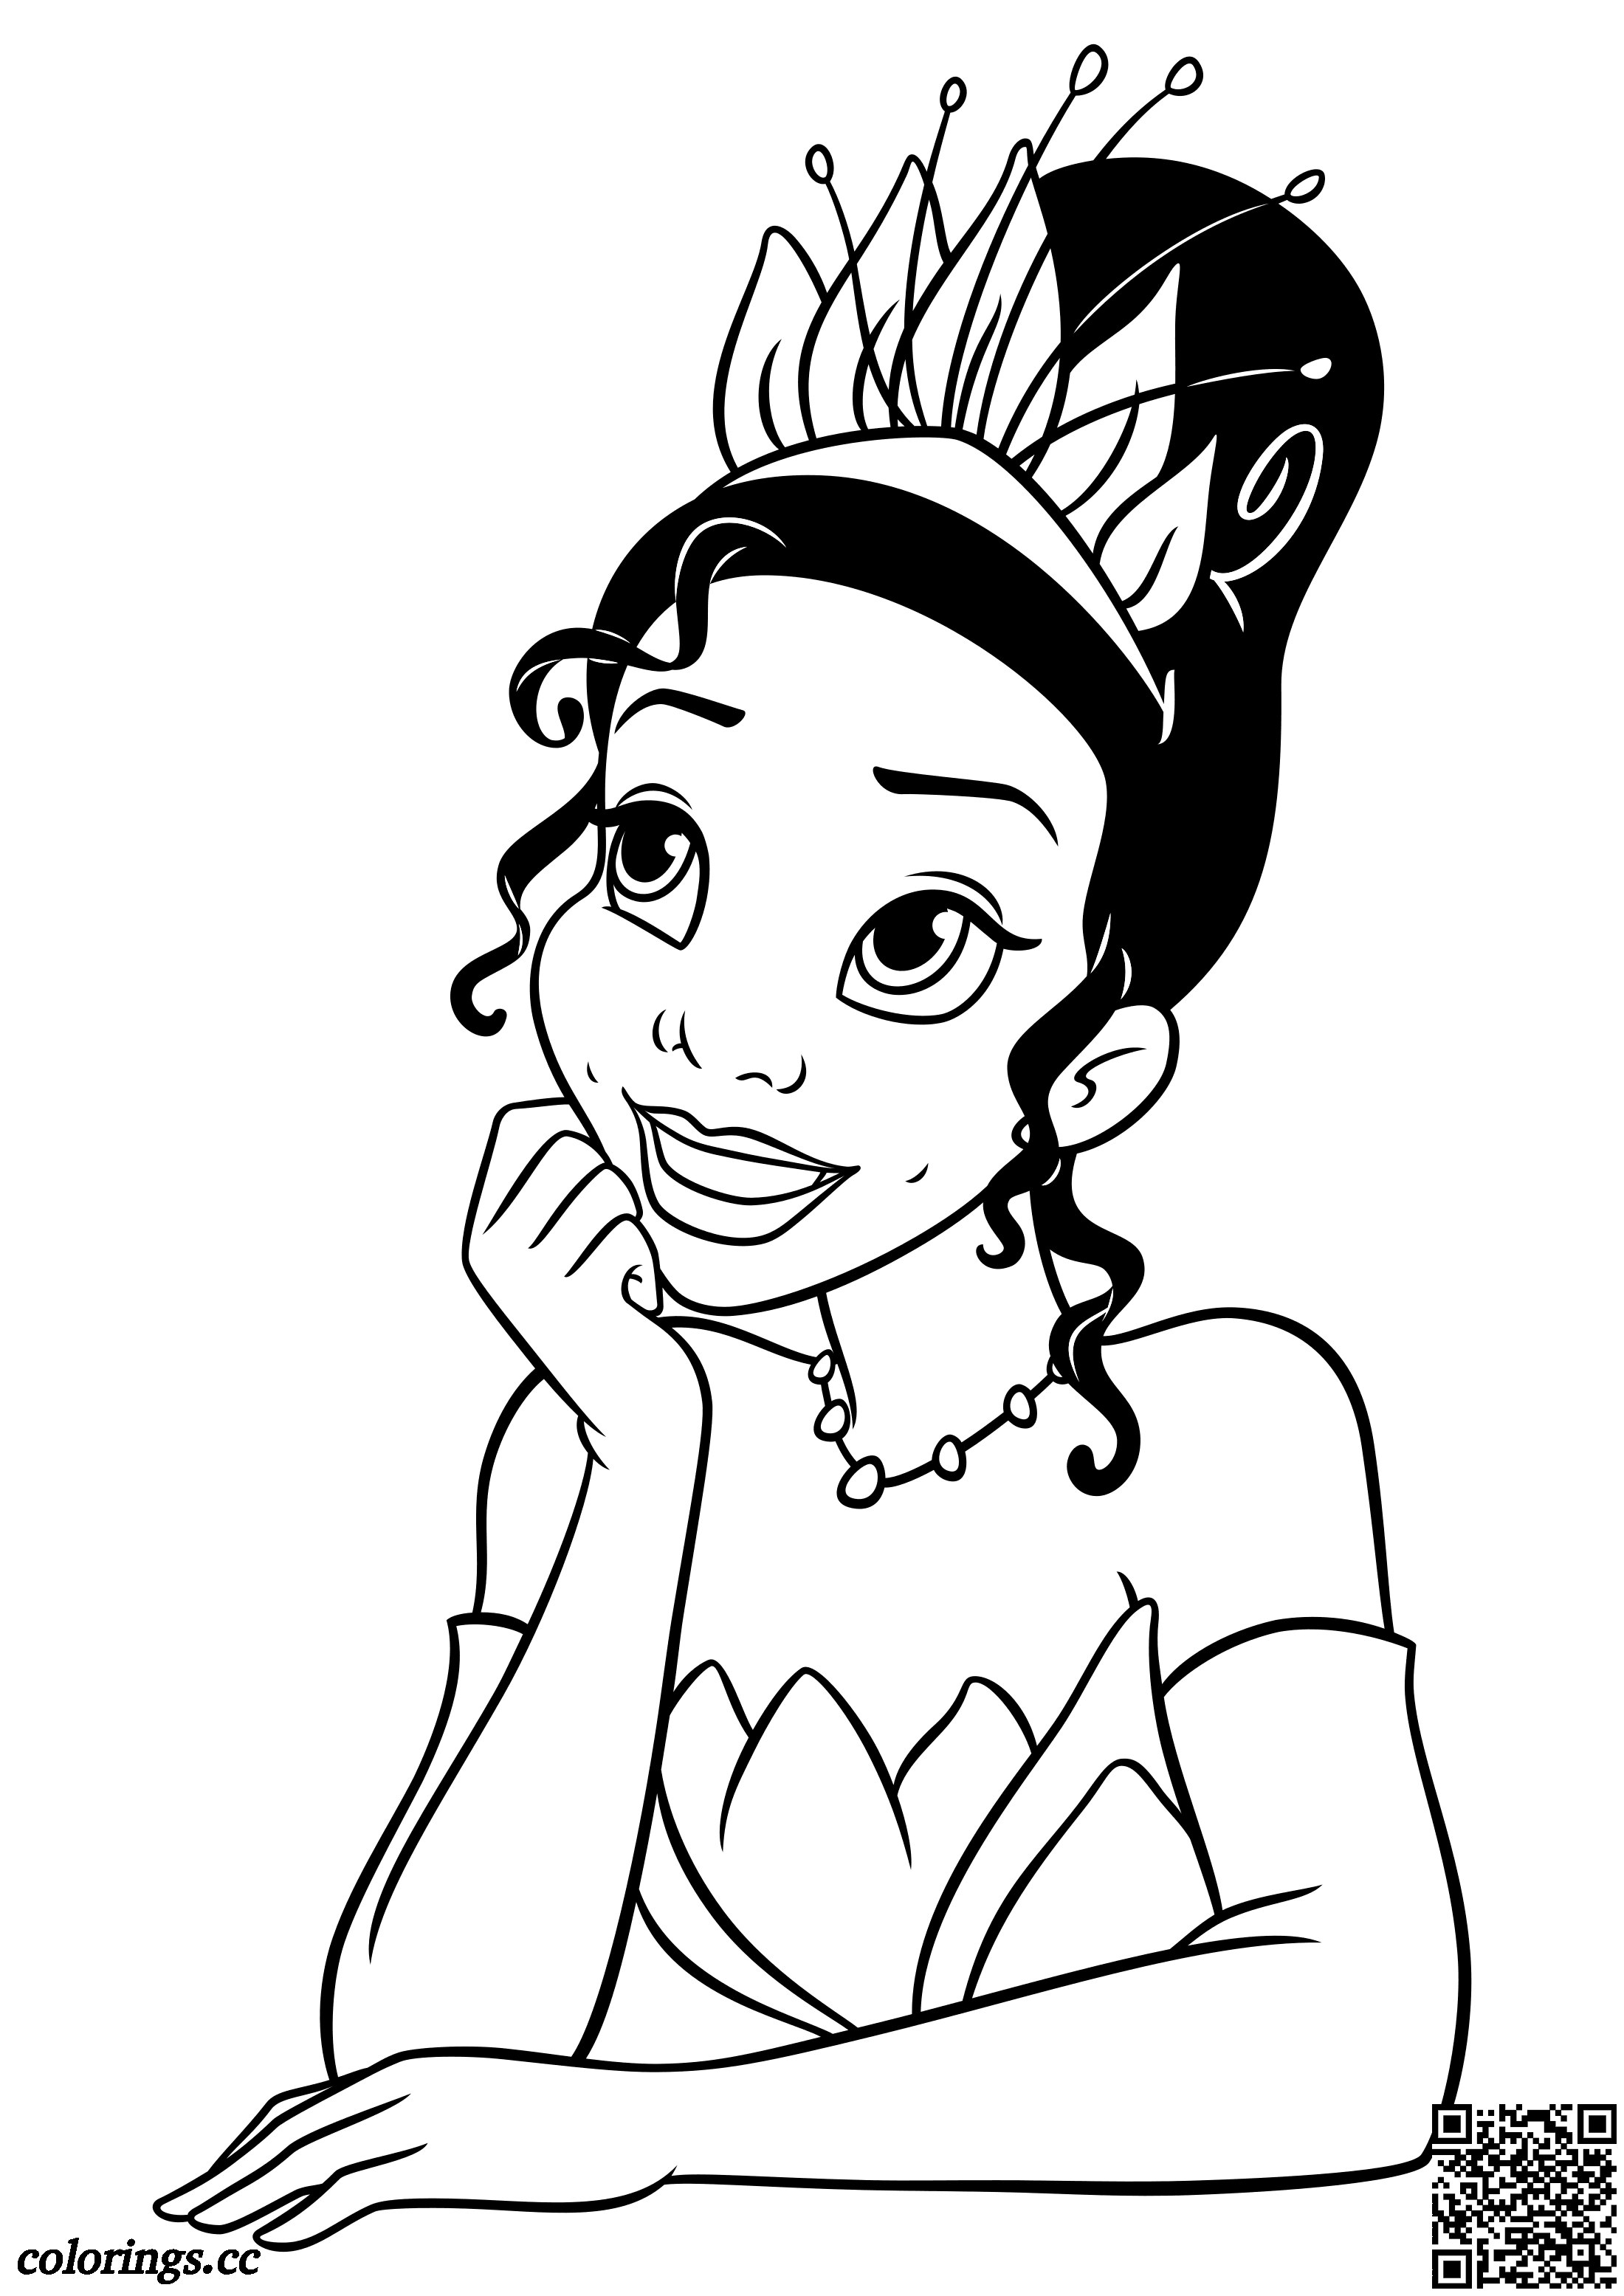 Dreamy Tiana coloring pages, Disney princesses coloring pages ...